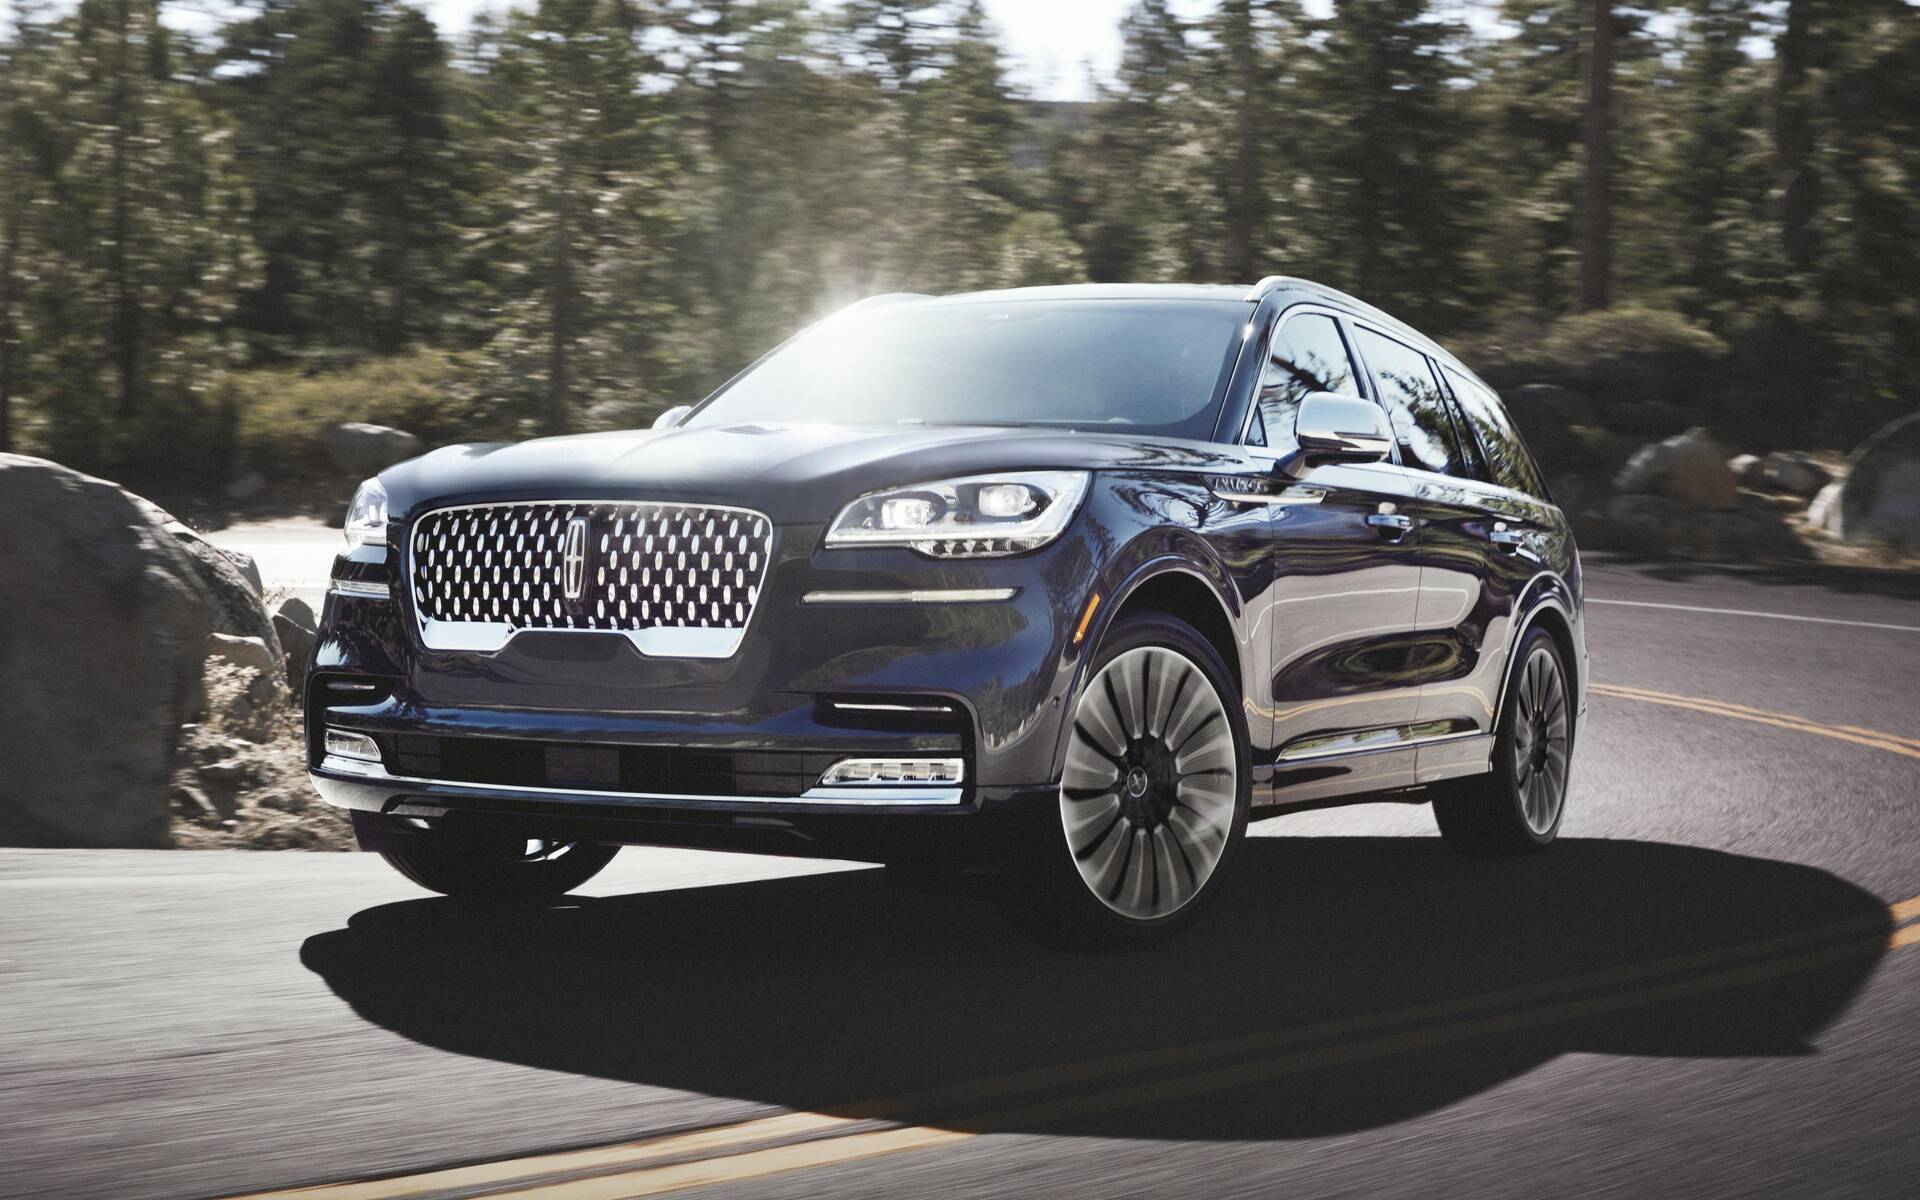 2022 Lincoln Aviator Grand Touring PHEV Price & Specifications The